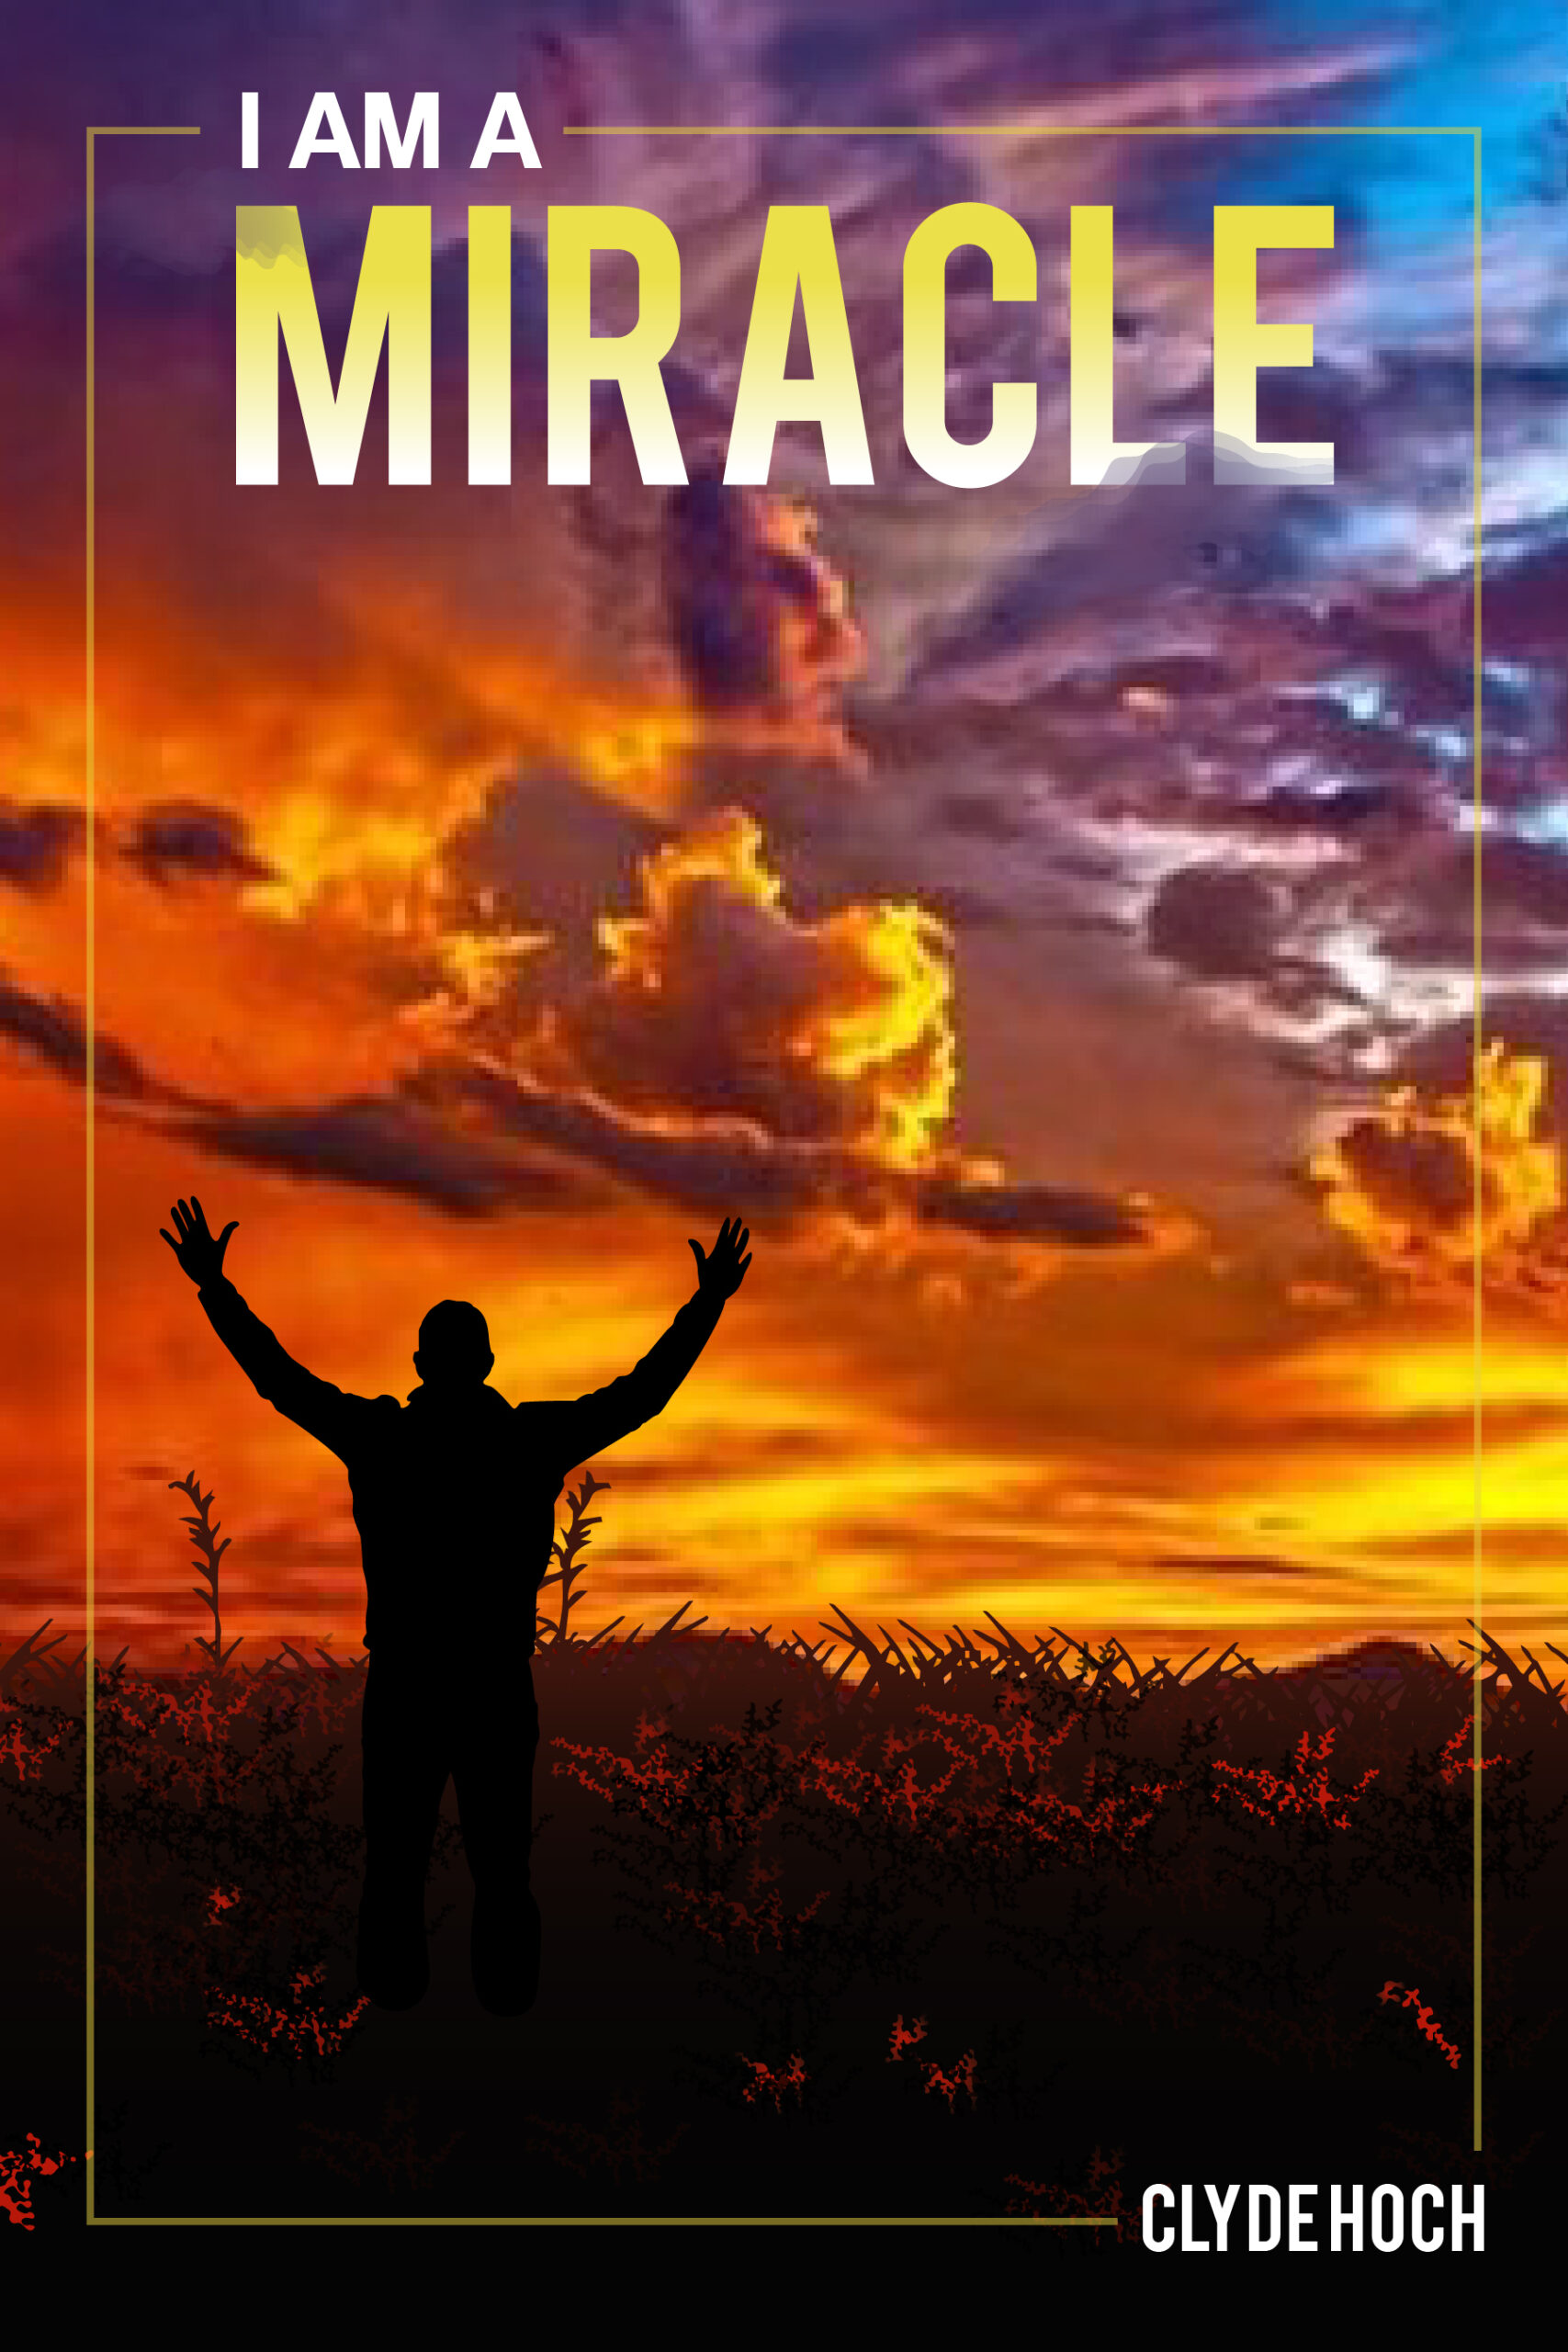 I AM A MIRACLE by Clyde Hoch